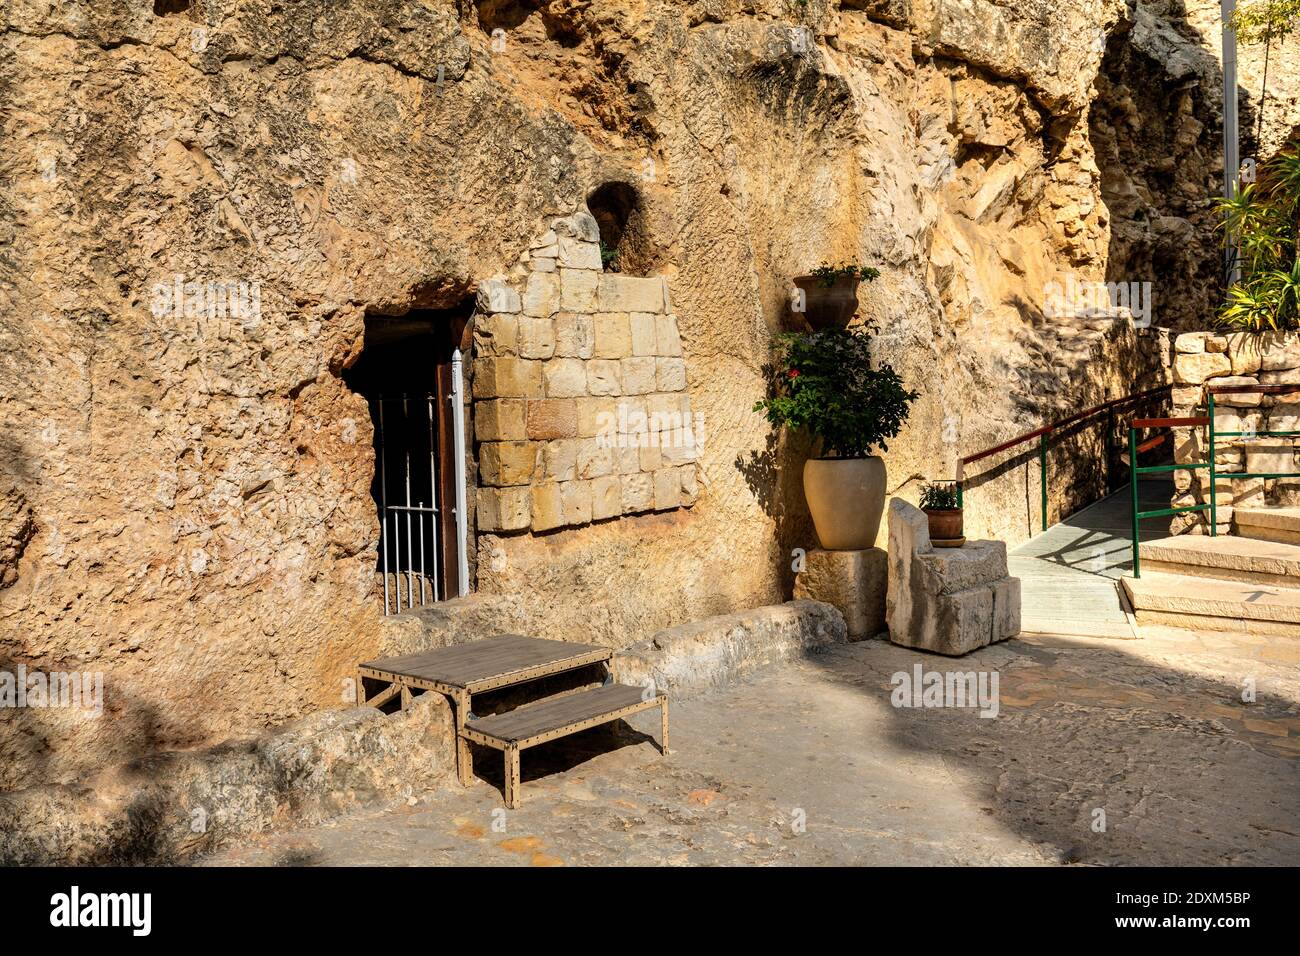 Jerusalem, Israel - October 14, 2017: Entrance to Garden Tomb considered as actual place of burial and resurrection of Jesus Christ near Old City Stock Photo